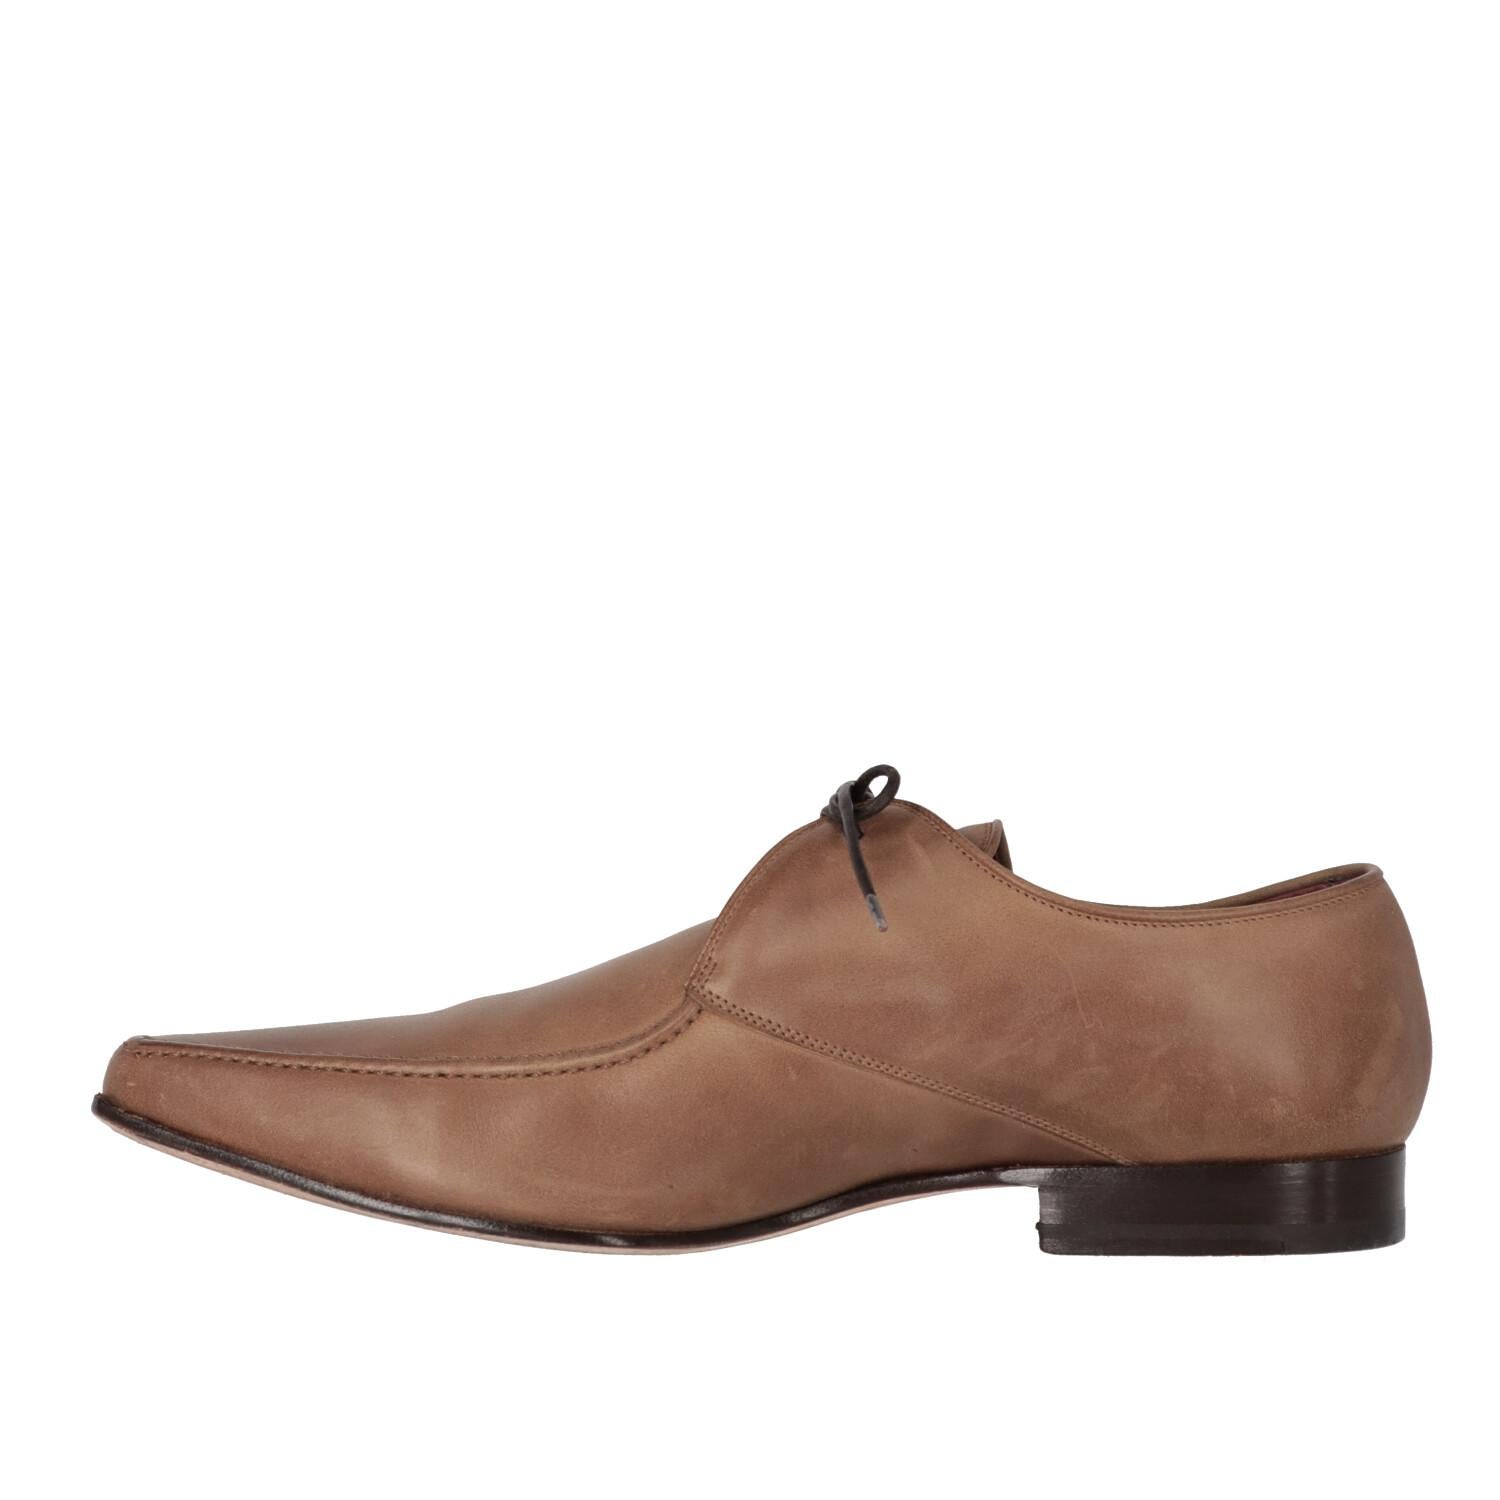 Gianfranco Ferré light brown genuine leather lace-up shoes, featuring a characteristic single eyelet, dark shoelaces and pointed toe spring. 

The item shows some signs of wear on the leather and the sole, as shown in the pictures.

Years: